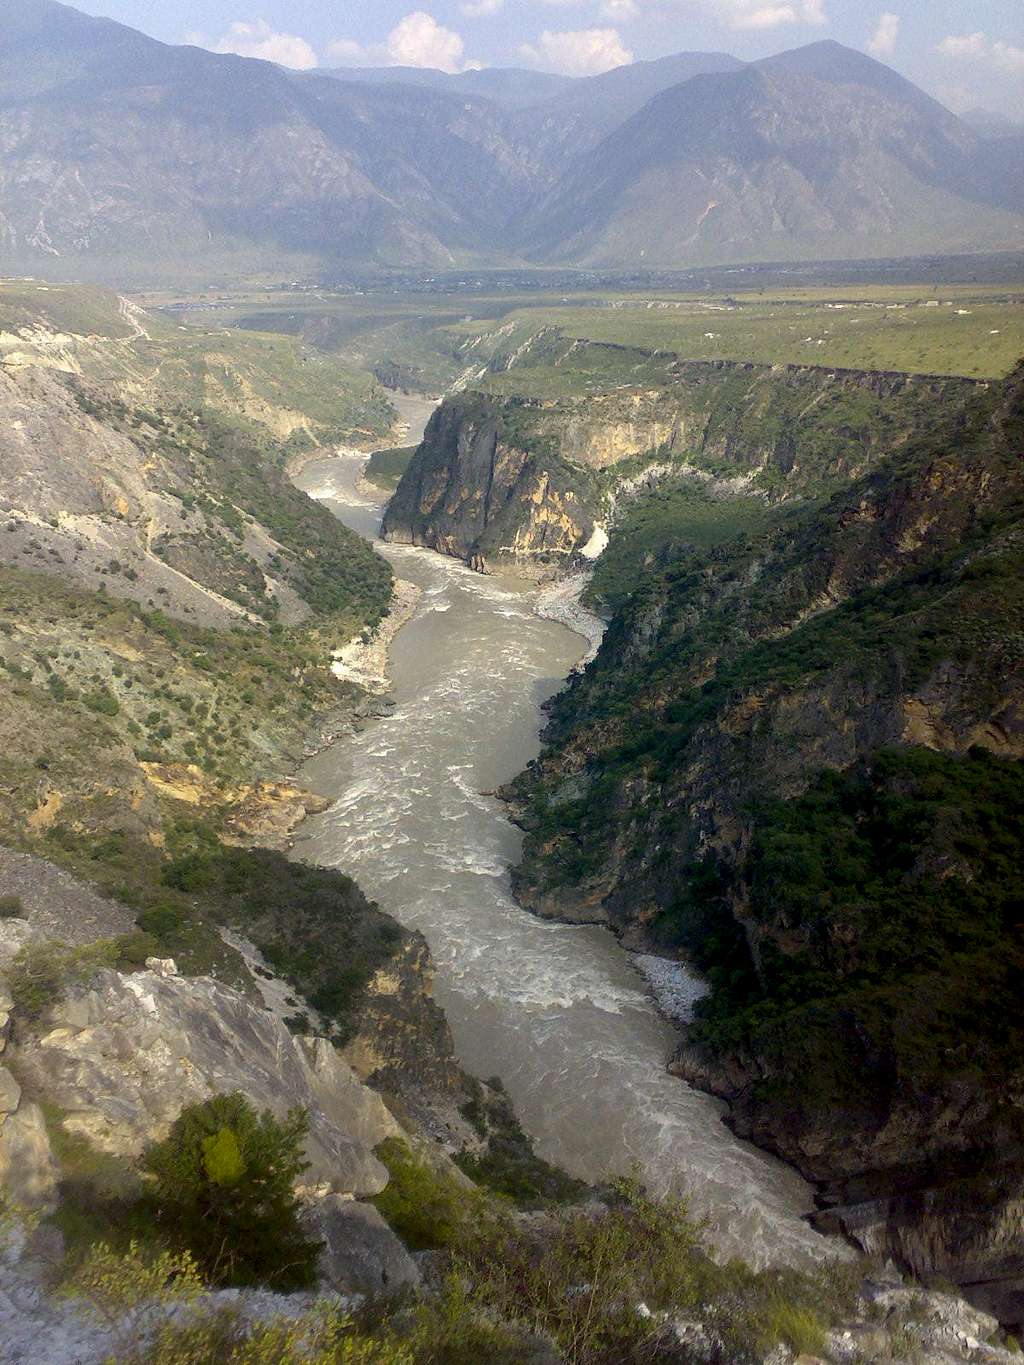 End of the Gorges